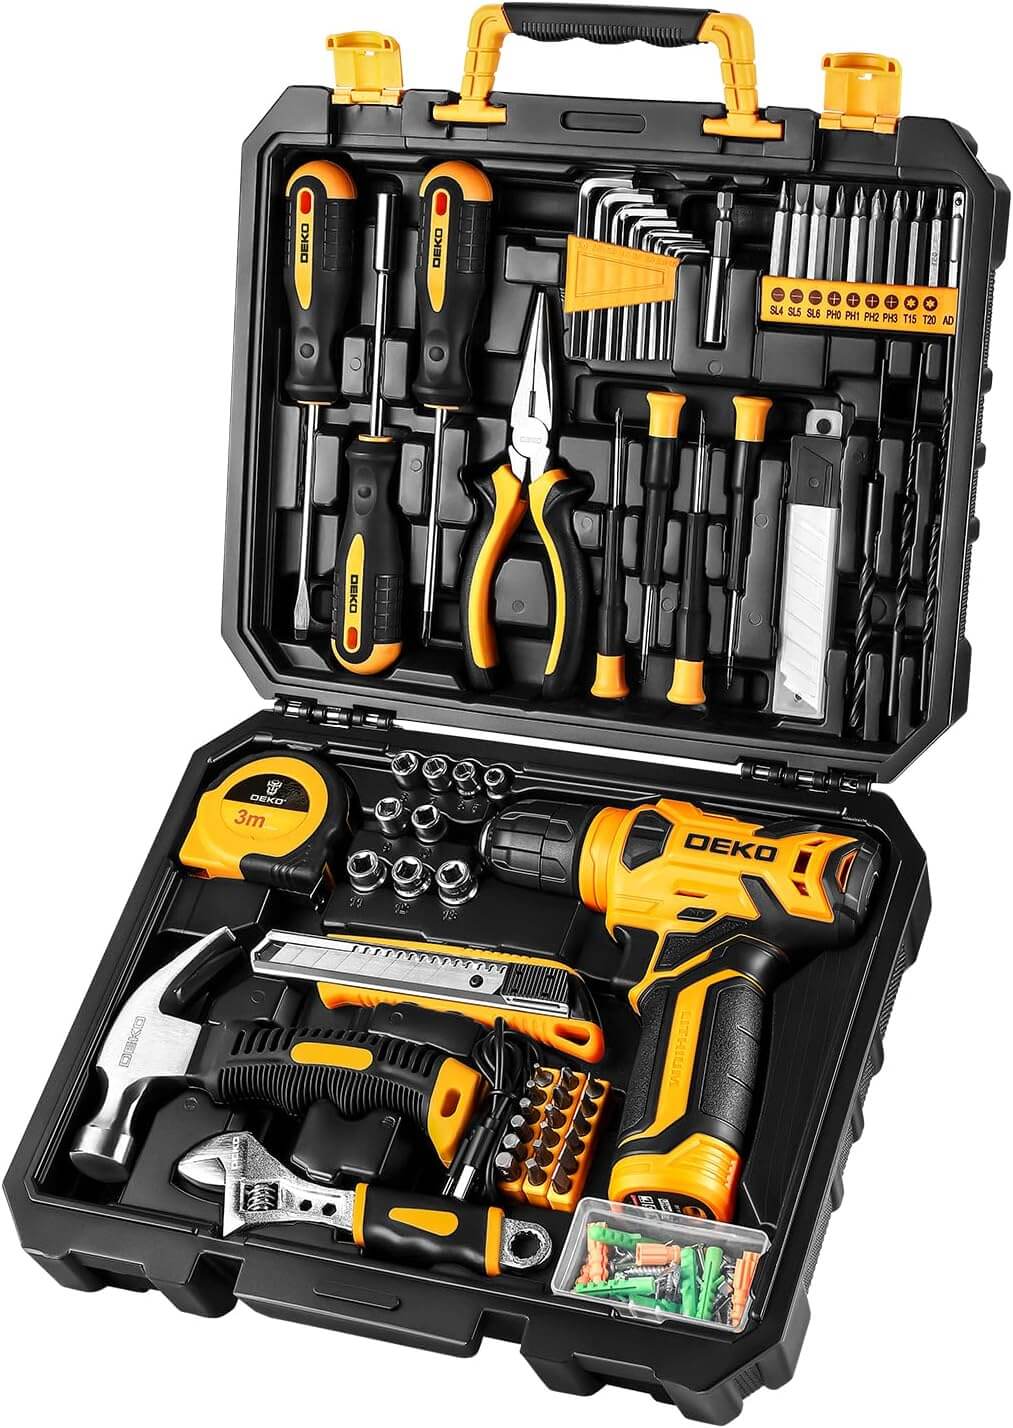 DEKOPRO 126 Piece Power Tool Combo Kits with 8V Cordless Drill, 10MM 3/8'' Keyless Chuck, Professional Household Home DIY Hand Tool Kits for Garden...
